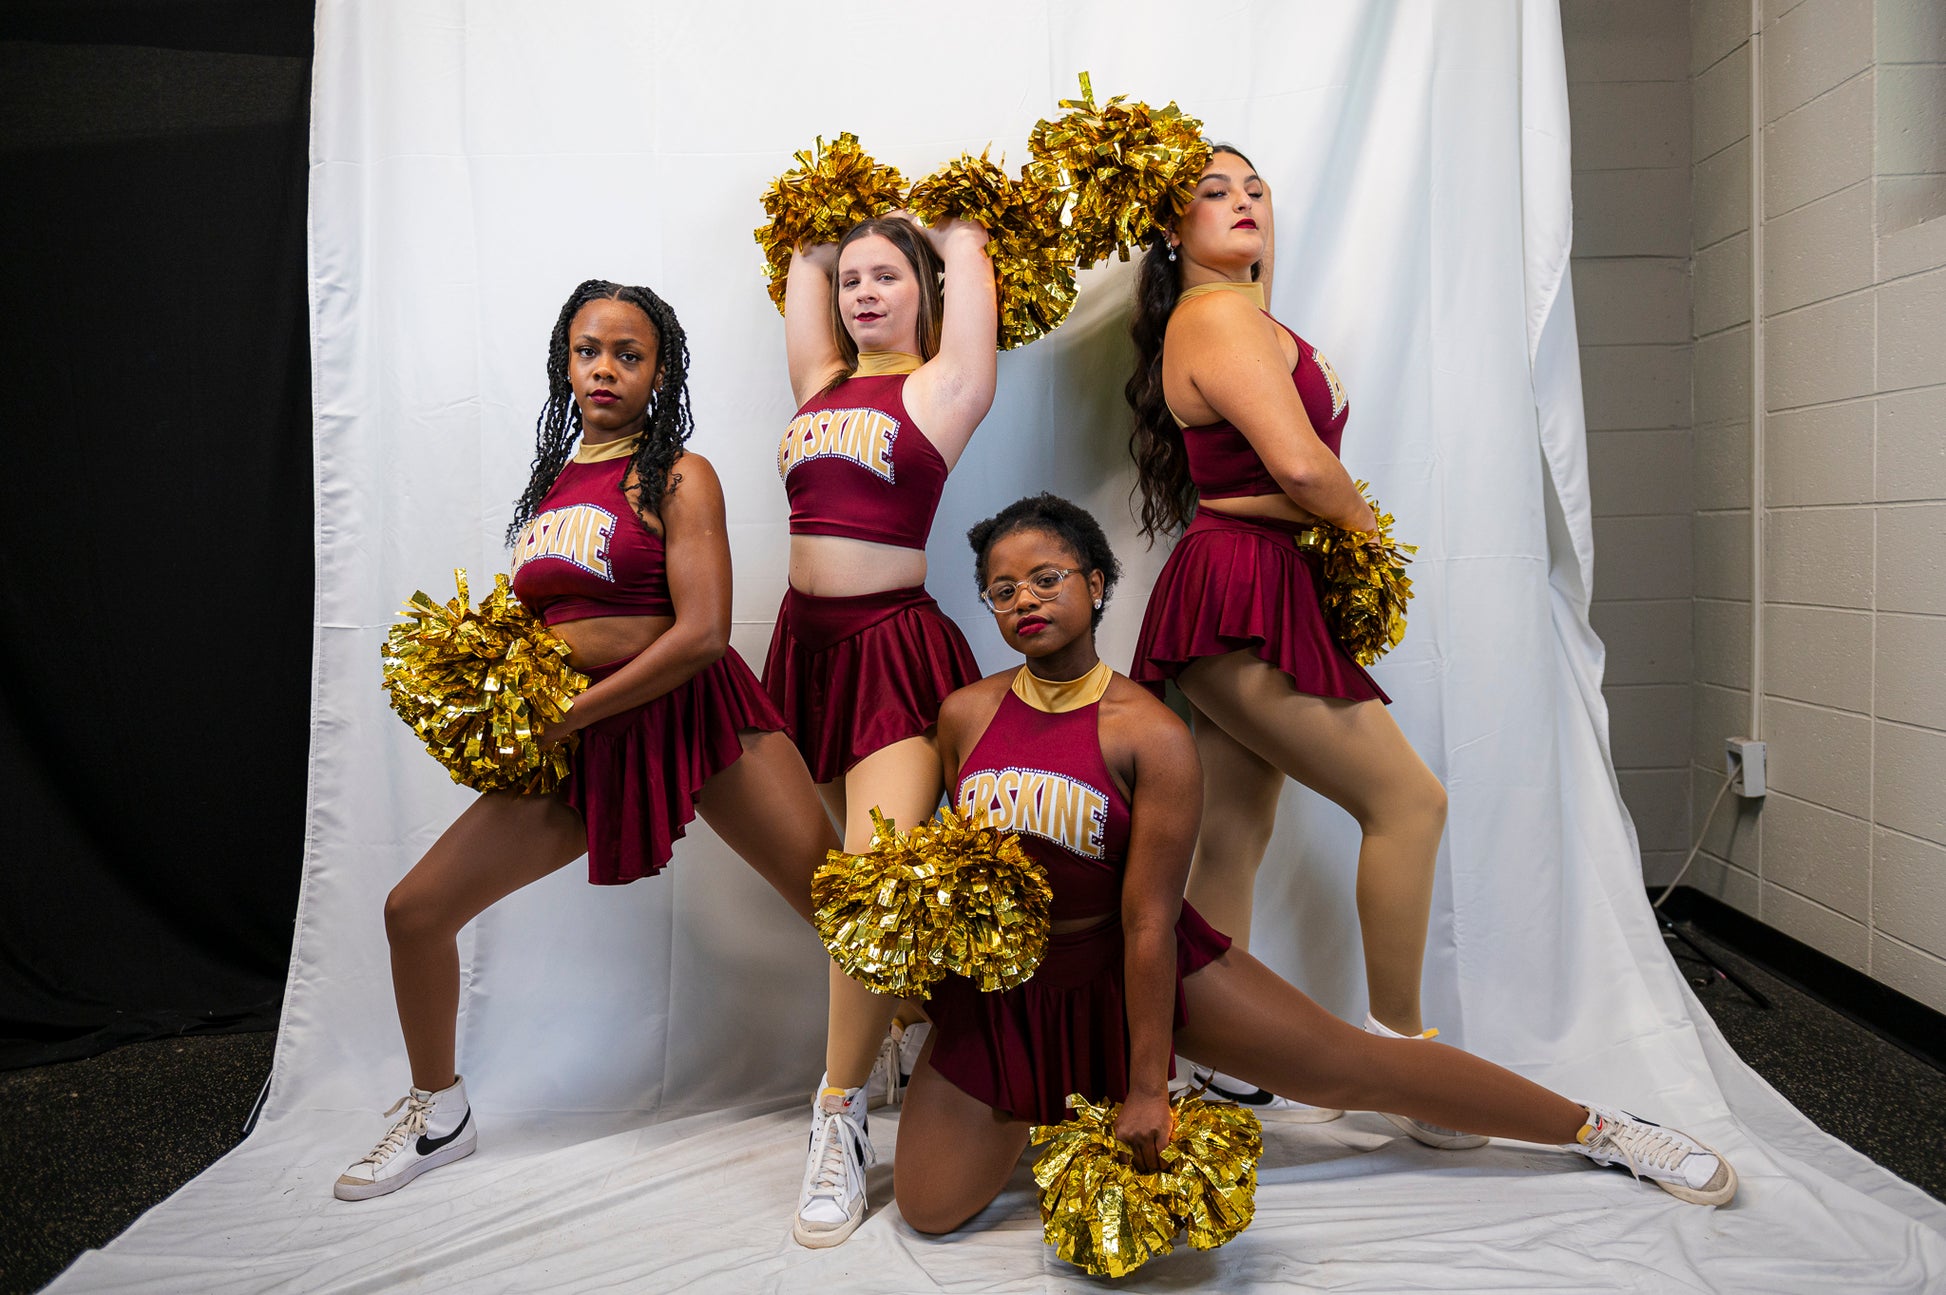 Fleet cheerleaders pose together with pompoms